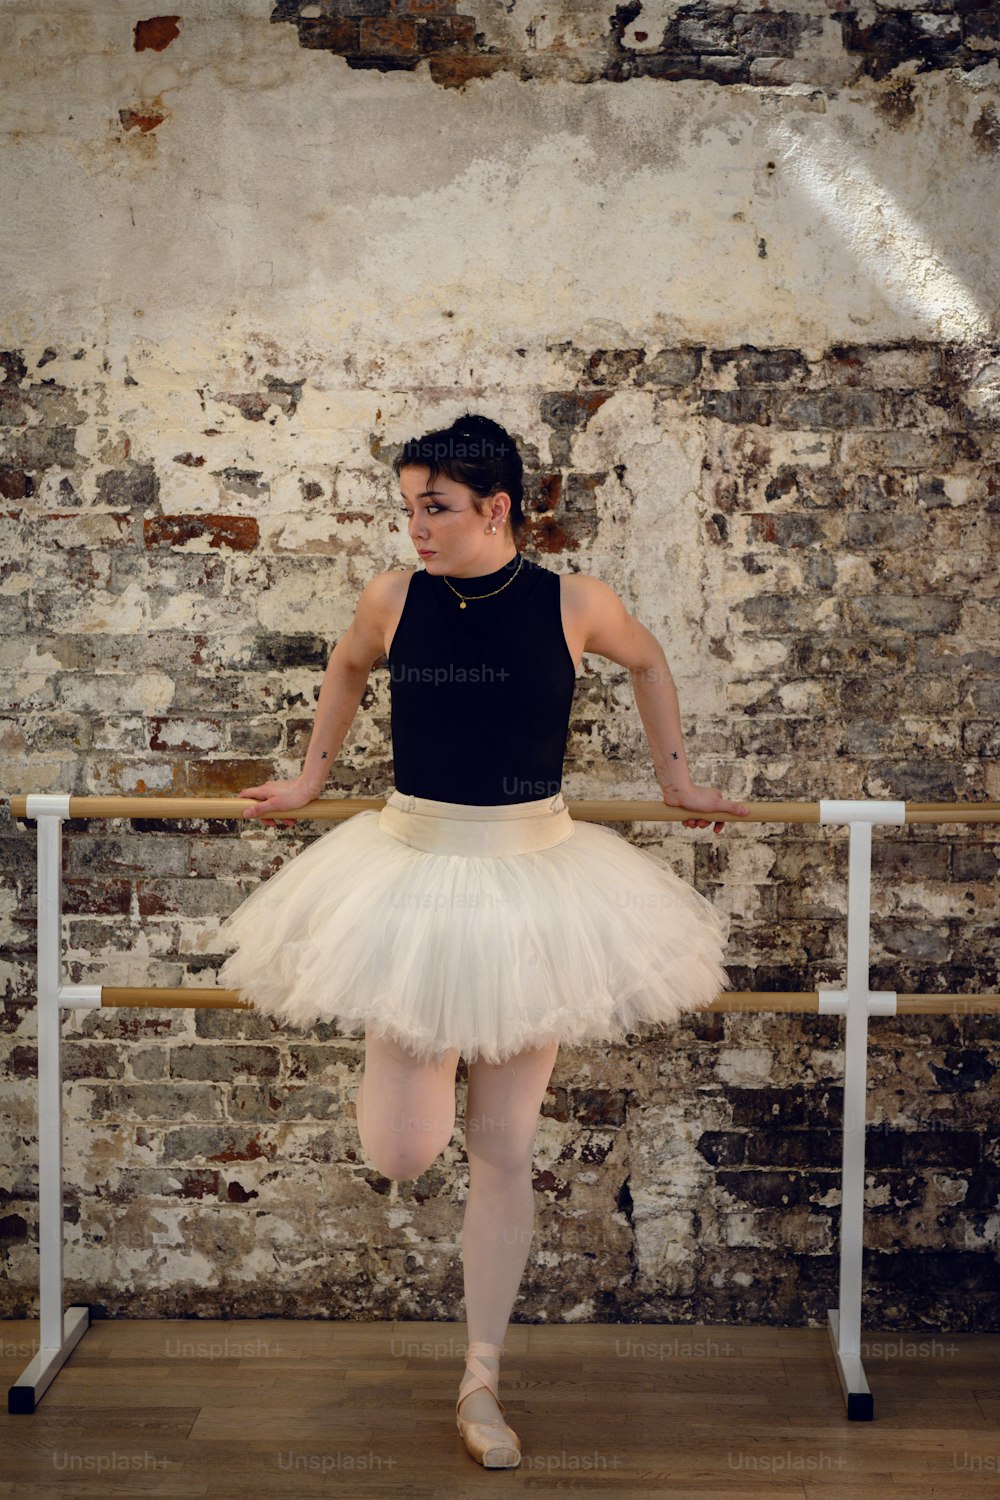 a woman in a white tutu and a black tank top